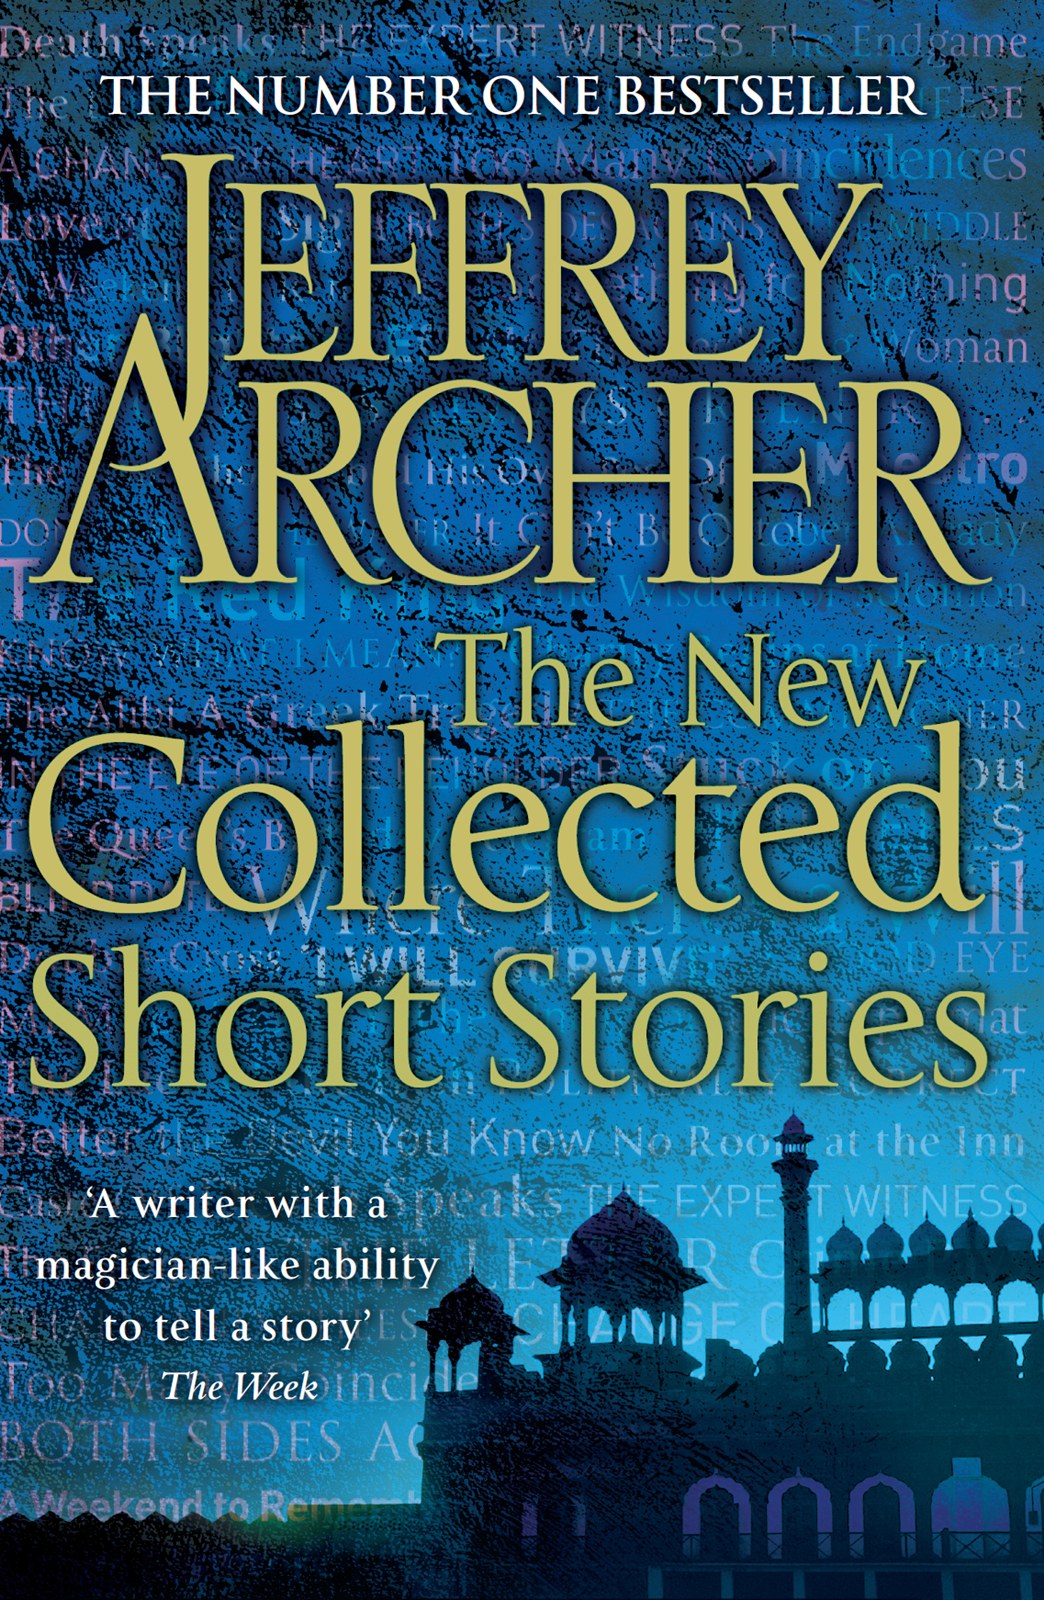 The New Collected Short Stories by Jeffrey Archer